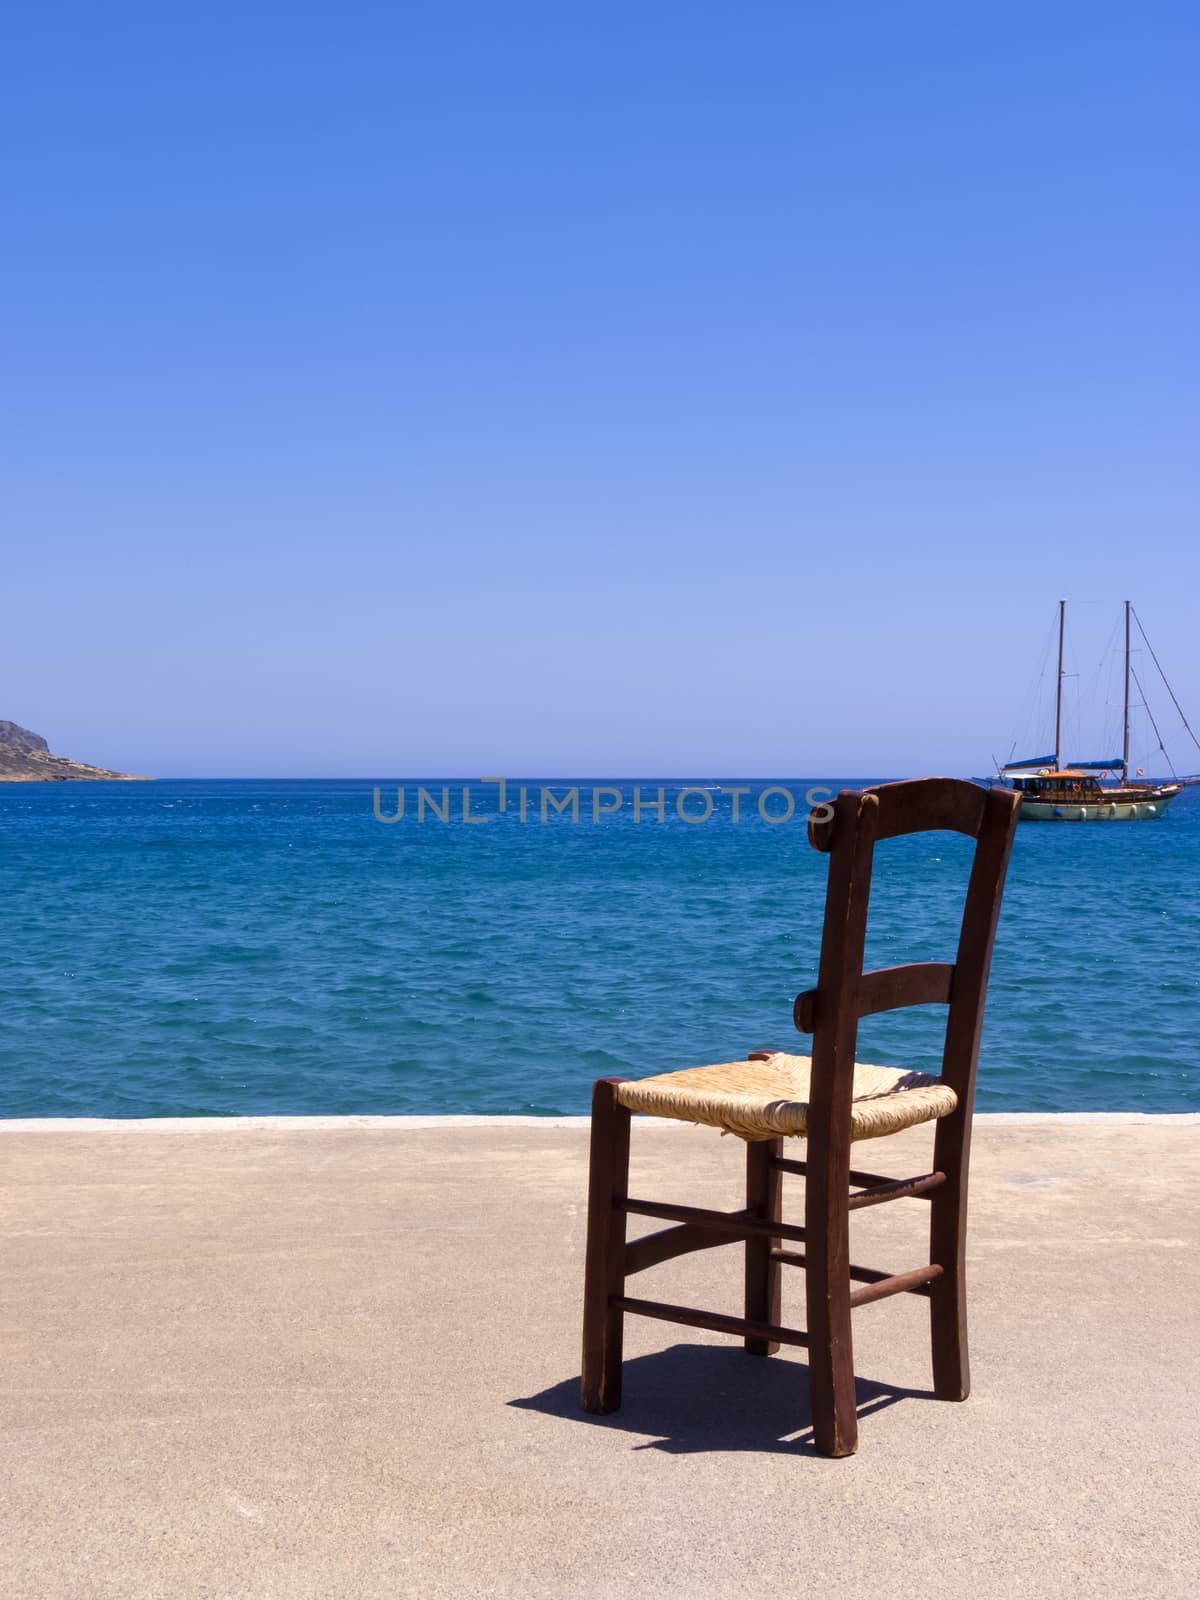 Old wooden chair near the sea - Crete, Greece by ankarb